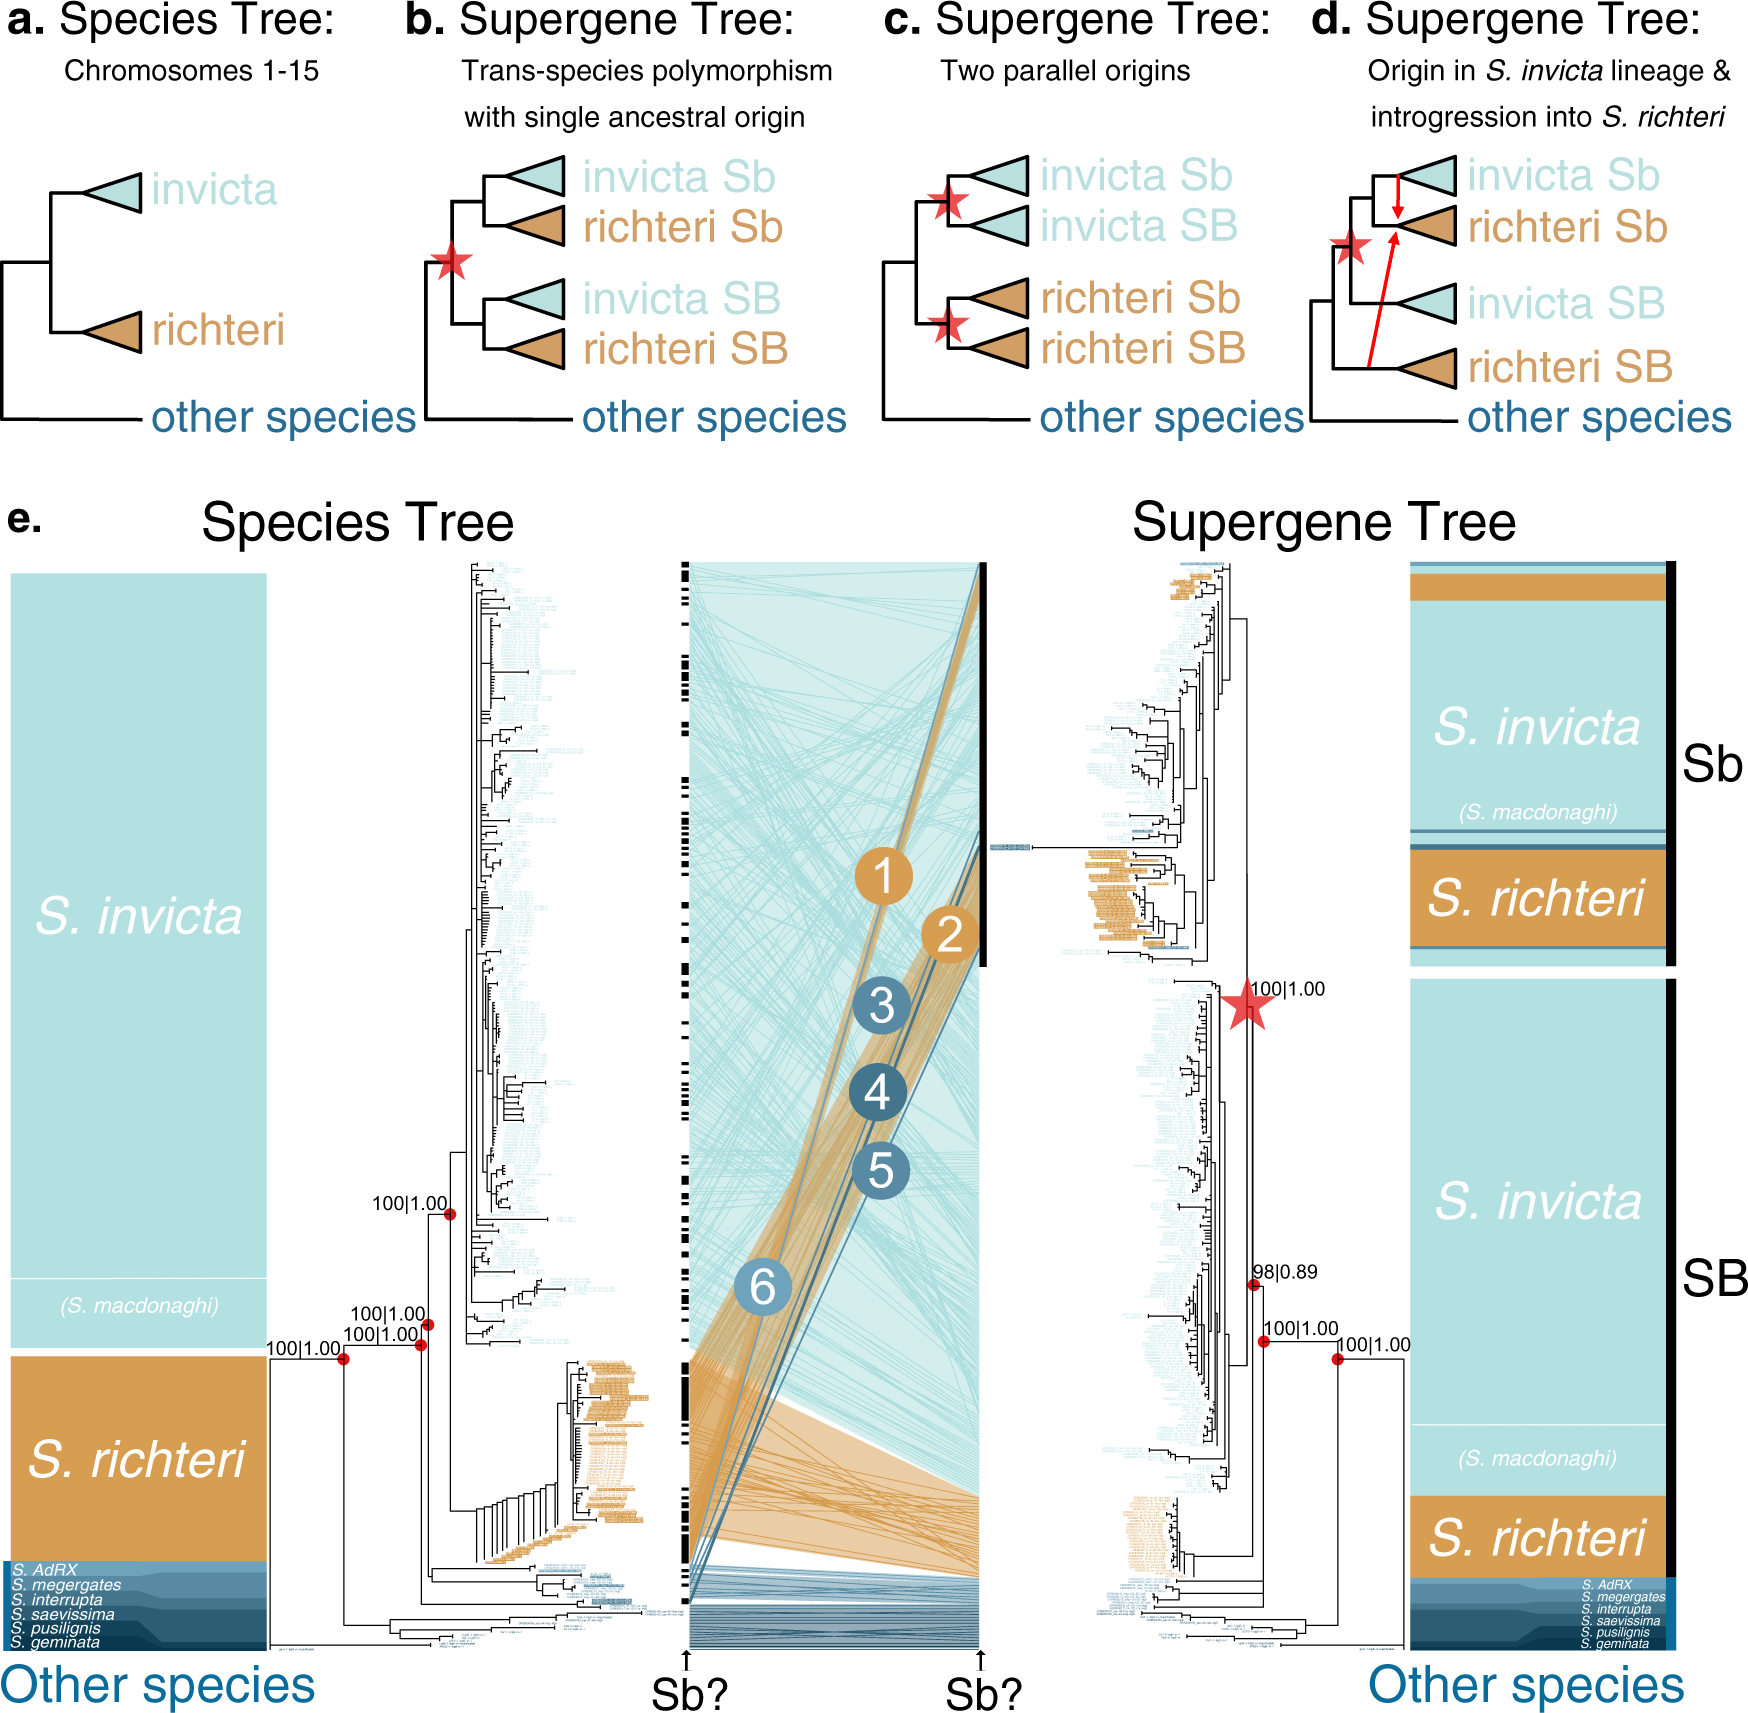 Hypothetical and empirical species and supergene phylogenetic trees